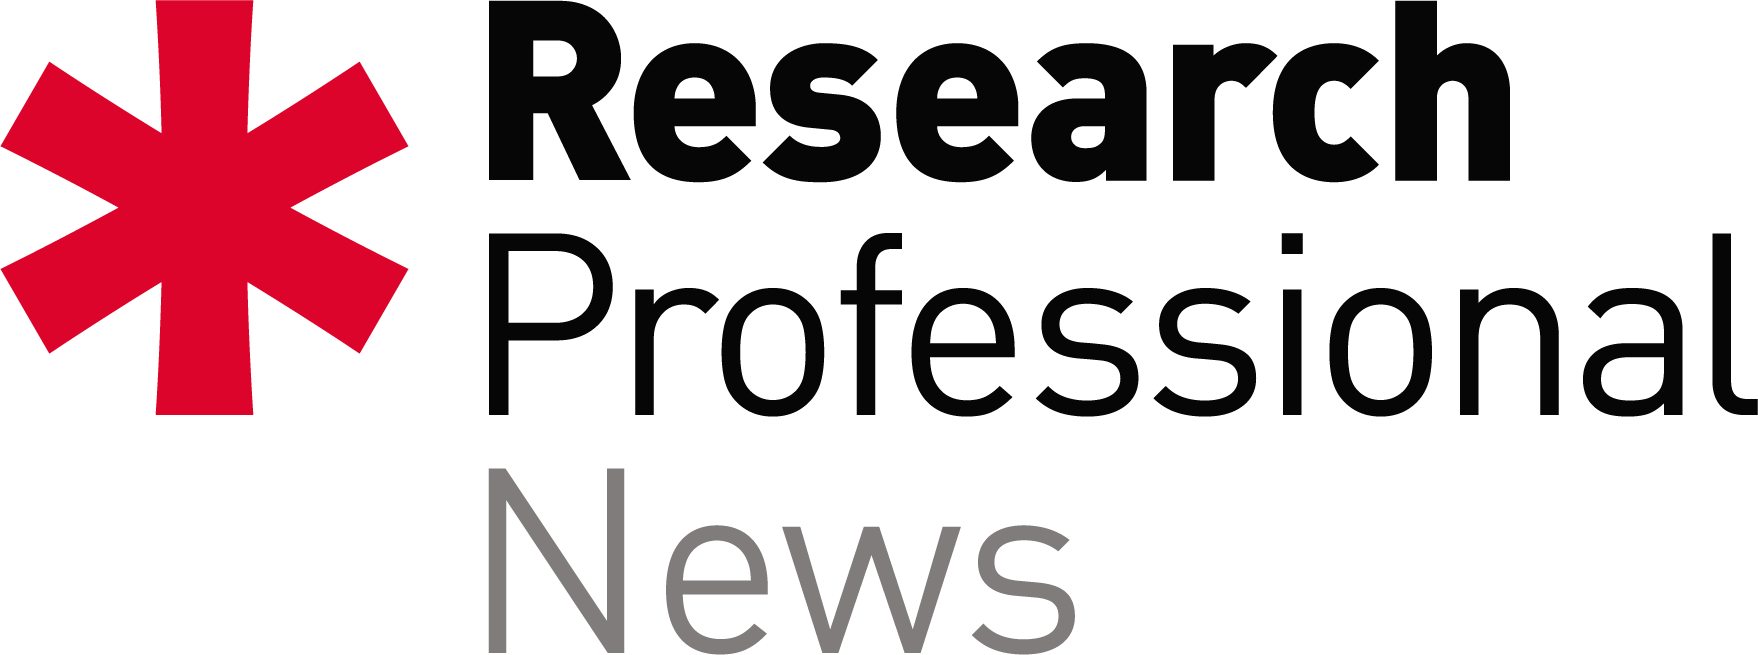 research professional news twitter